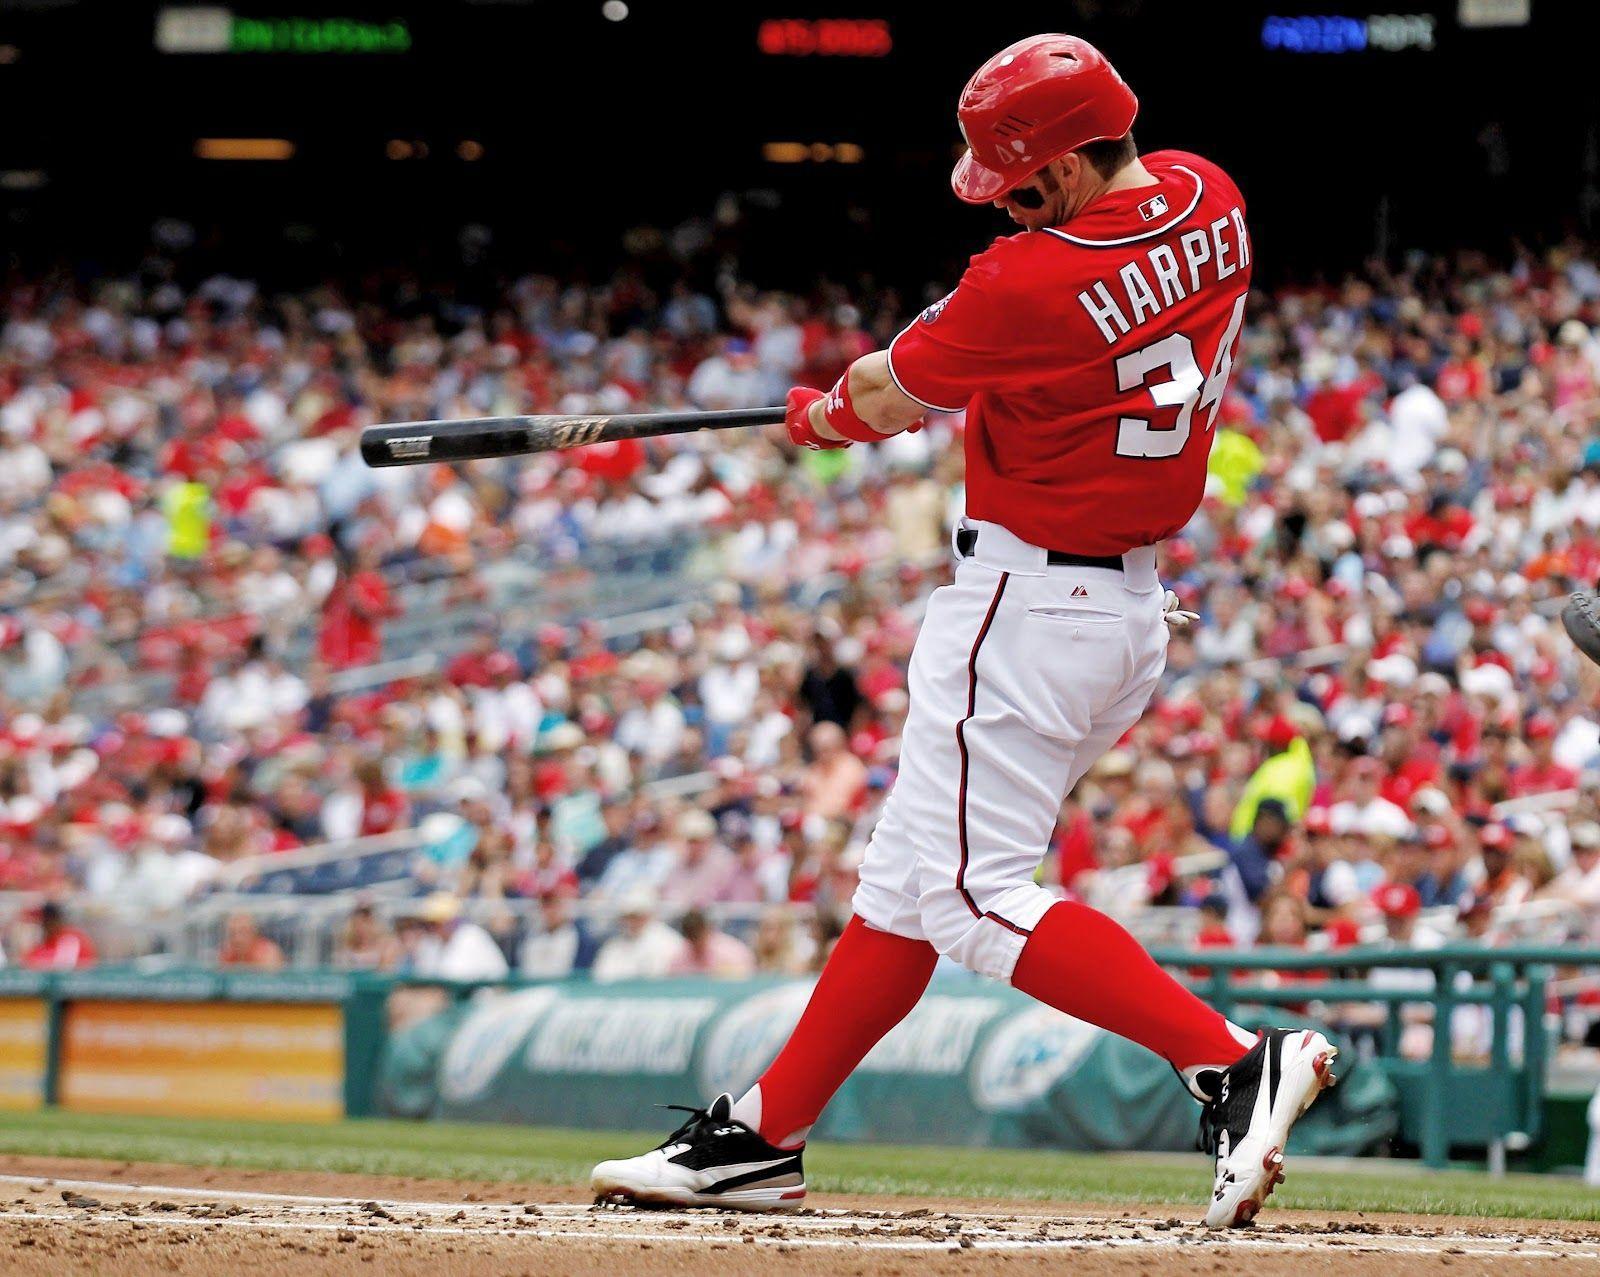 Bryce Harper is the right fielder for the Washington Nationals. He